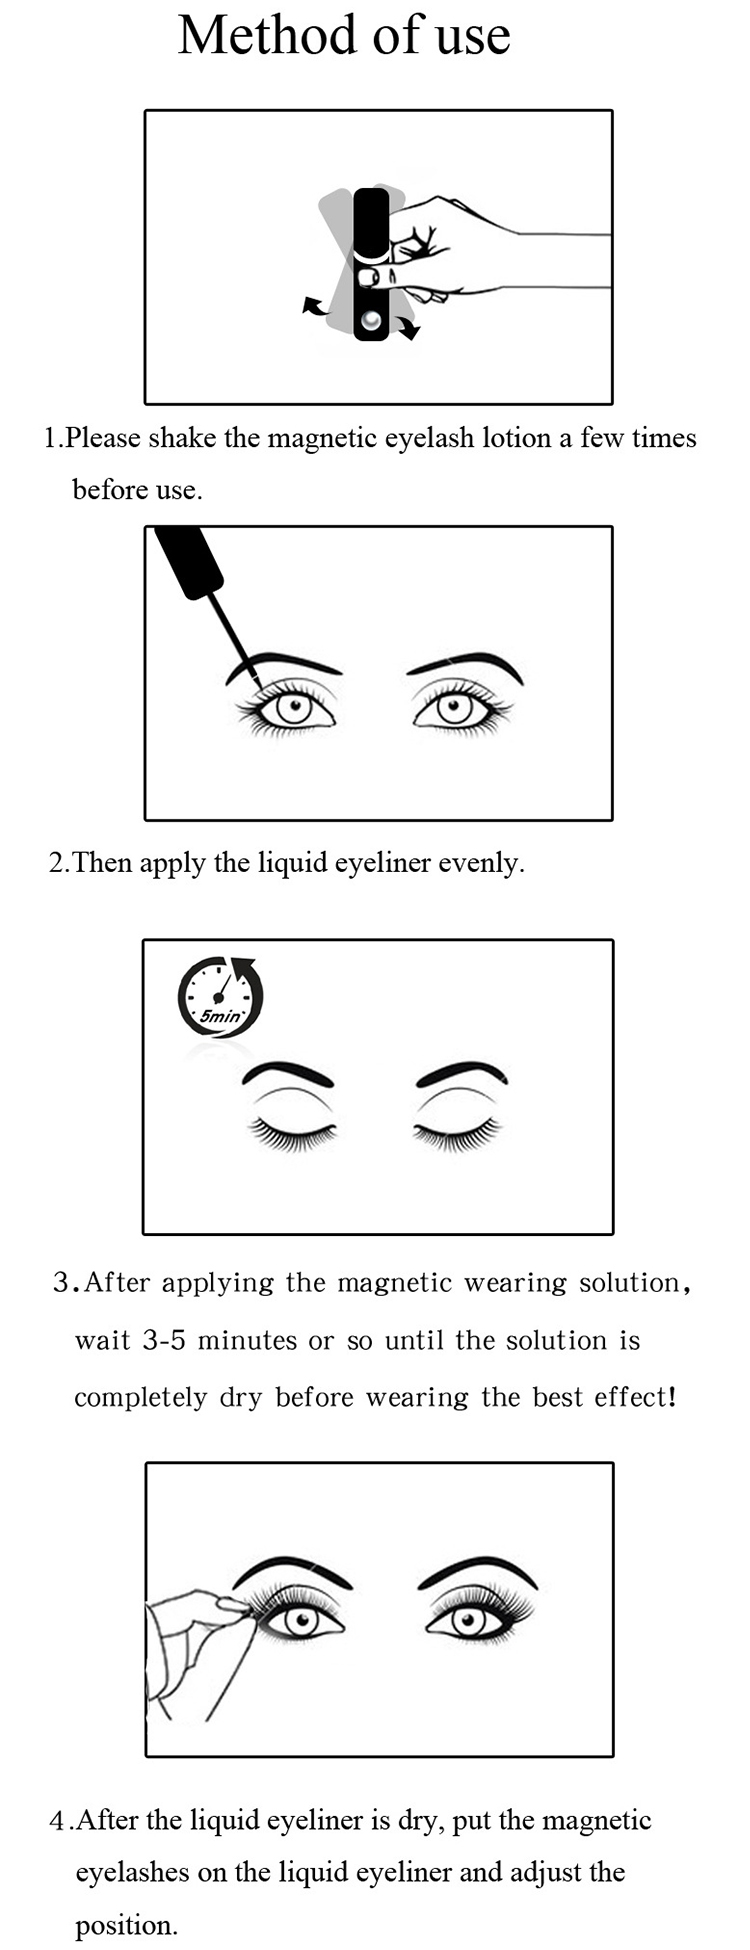 how-to-use-of-the-magnetic-eyelashes.jpg